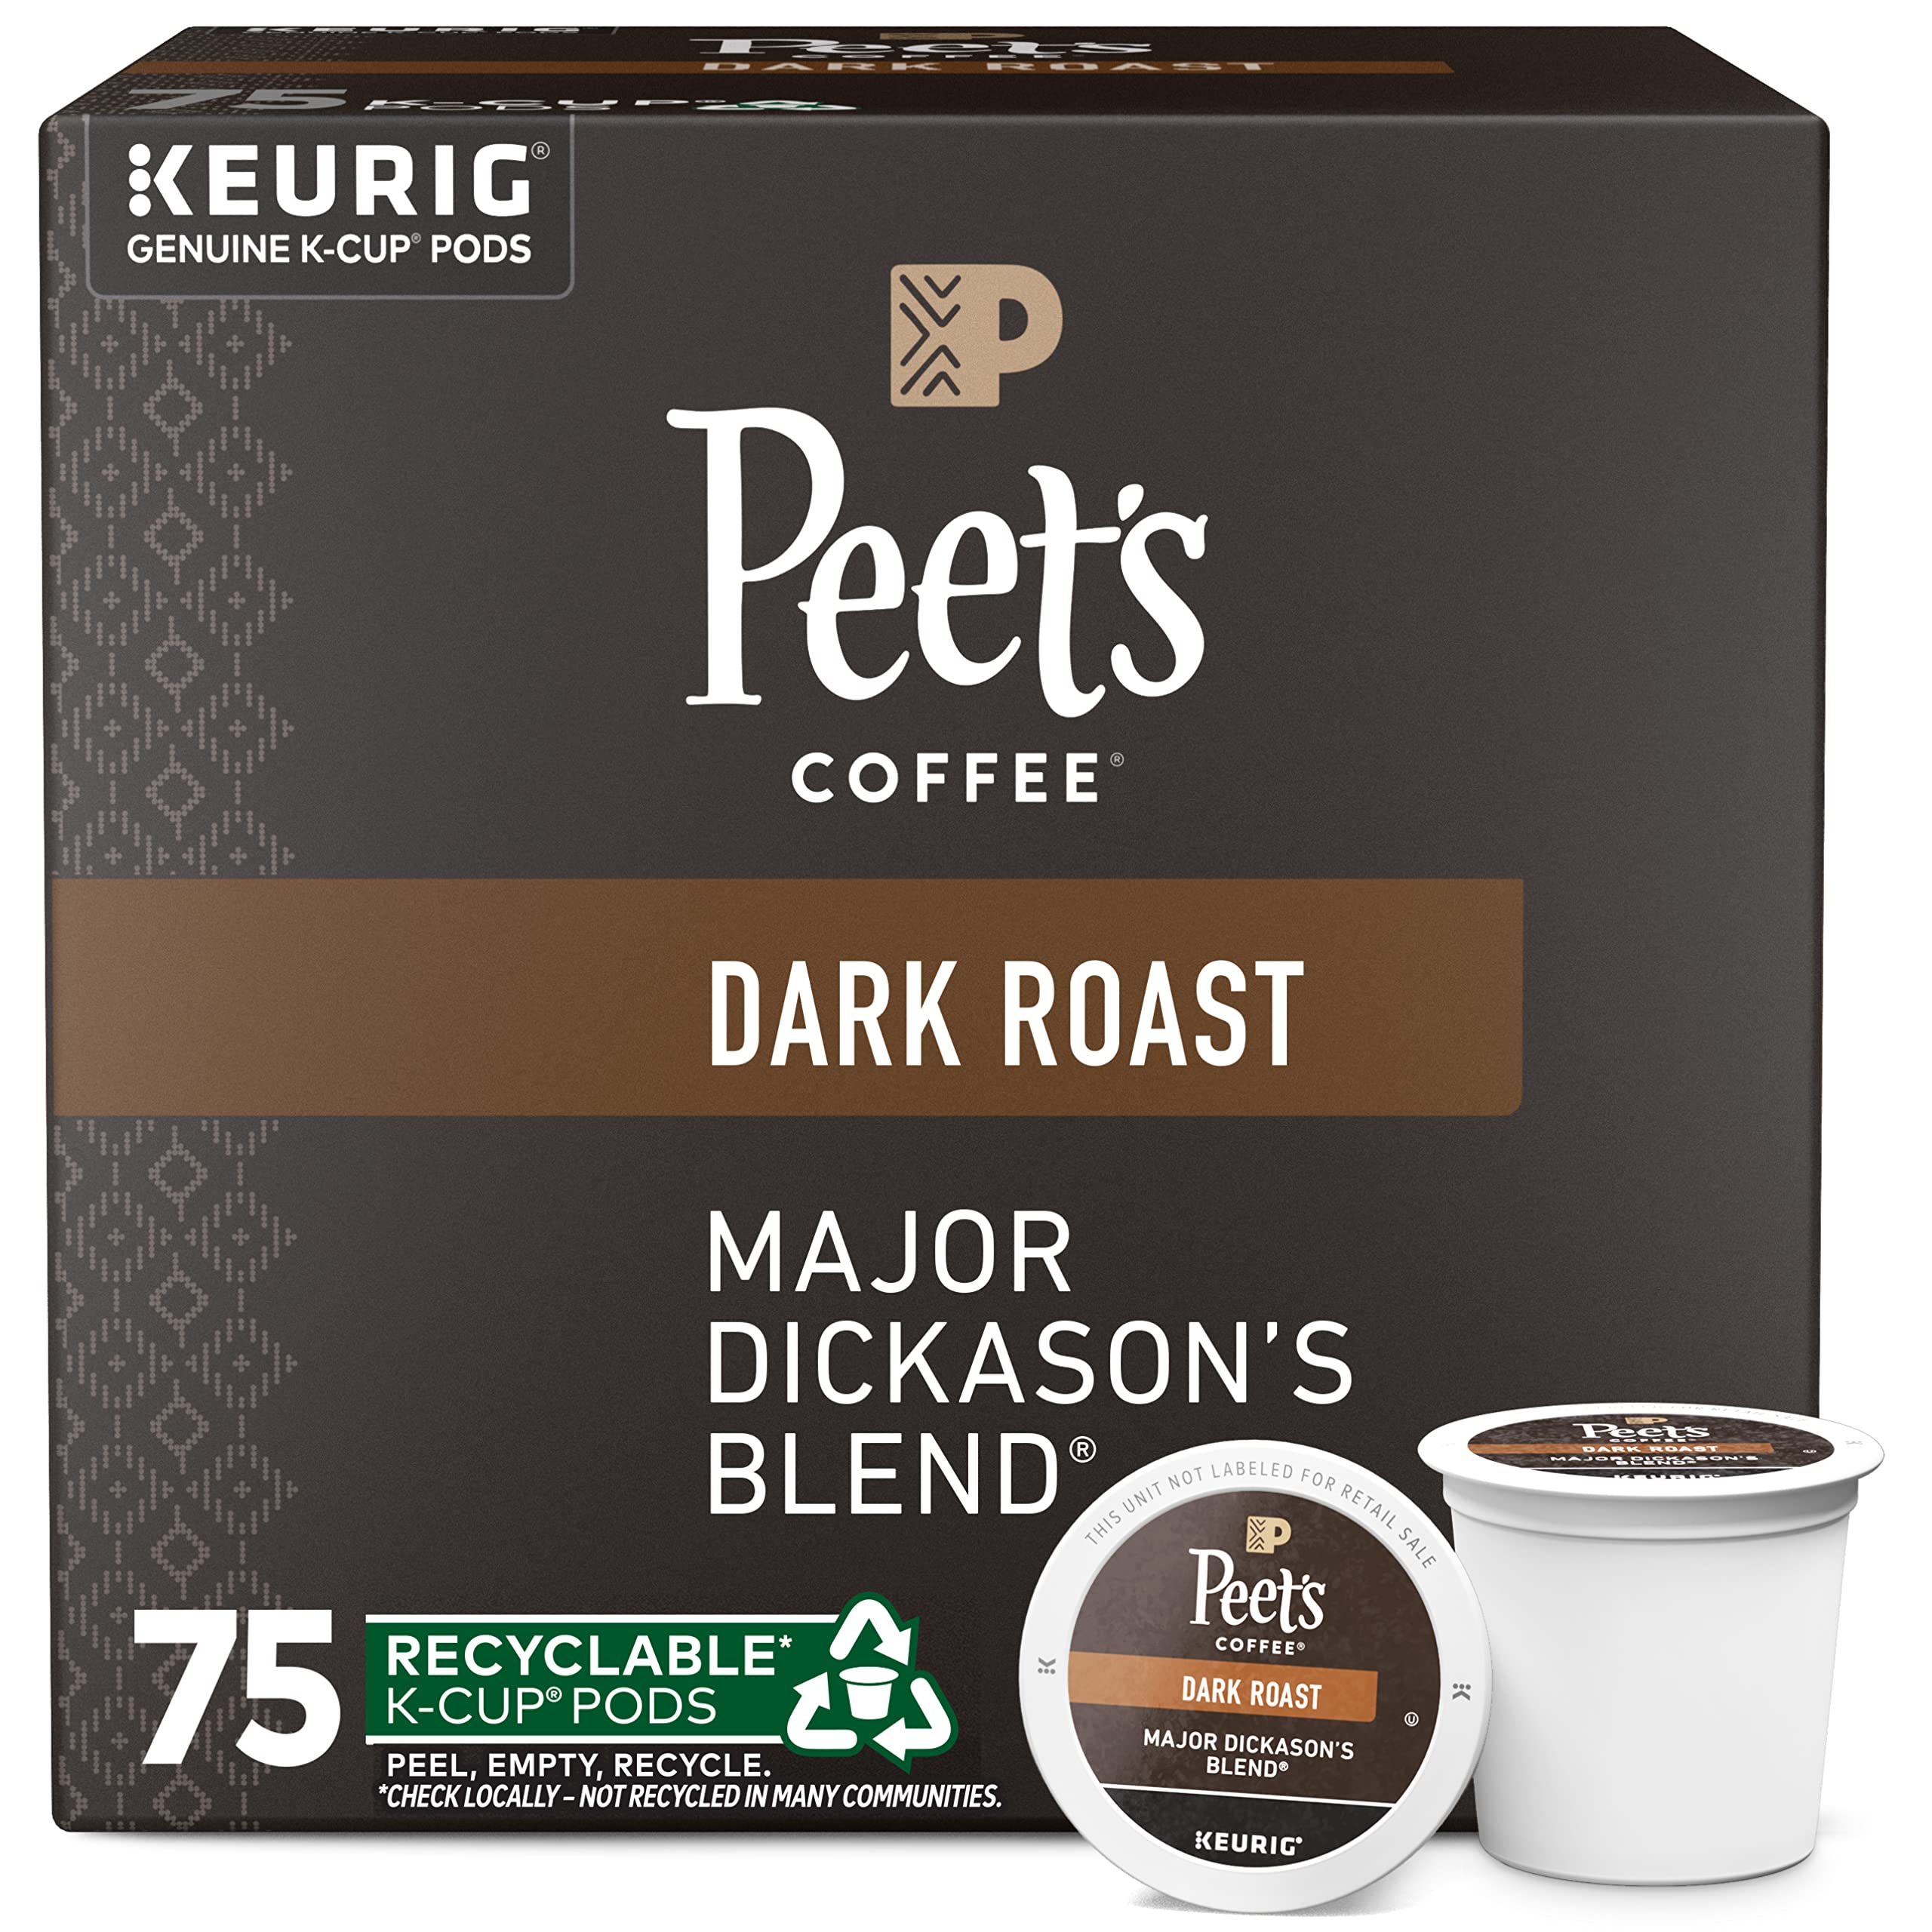 75-Count Peet’s Coffee Major Dickason's Blend Dark Roast Coffee Pods for Keurig Brewers $29.99 (.39c Ea.) w/S&S + Free Shipping